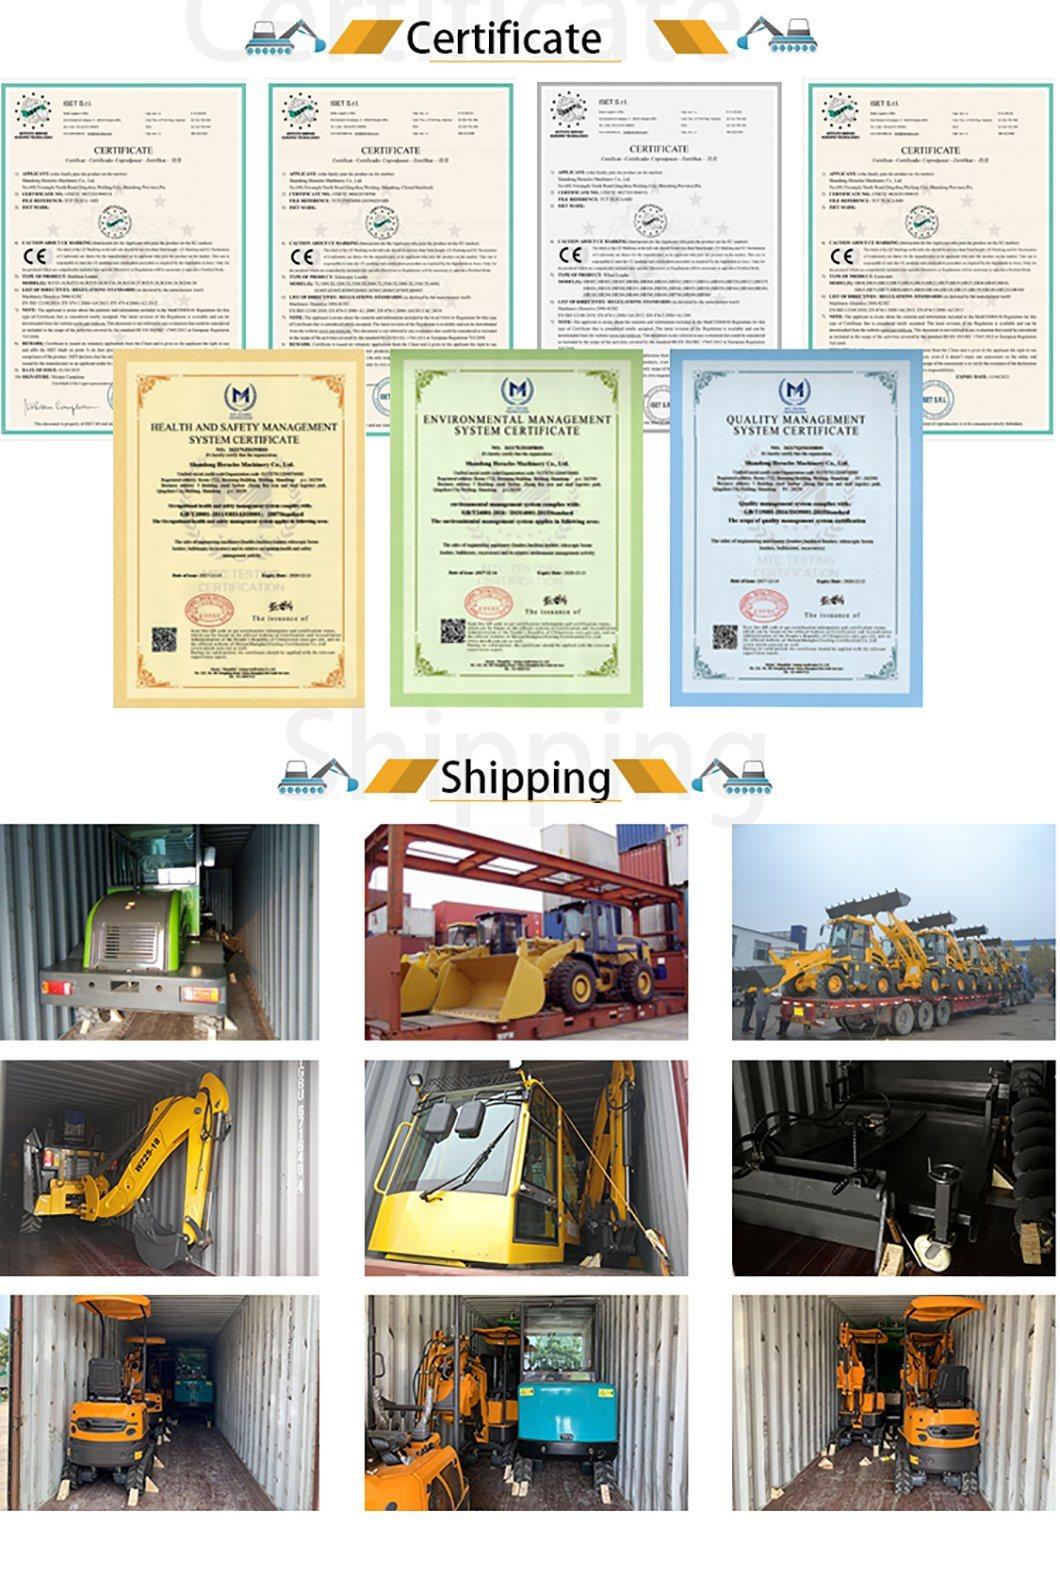 Heracels New Products Chinese Wheel Loader with Price List